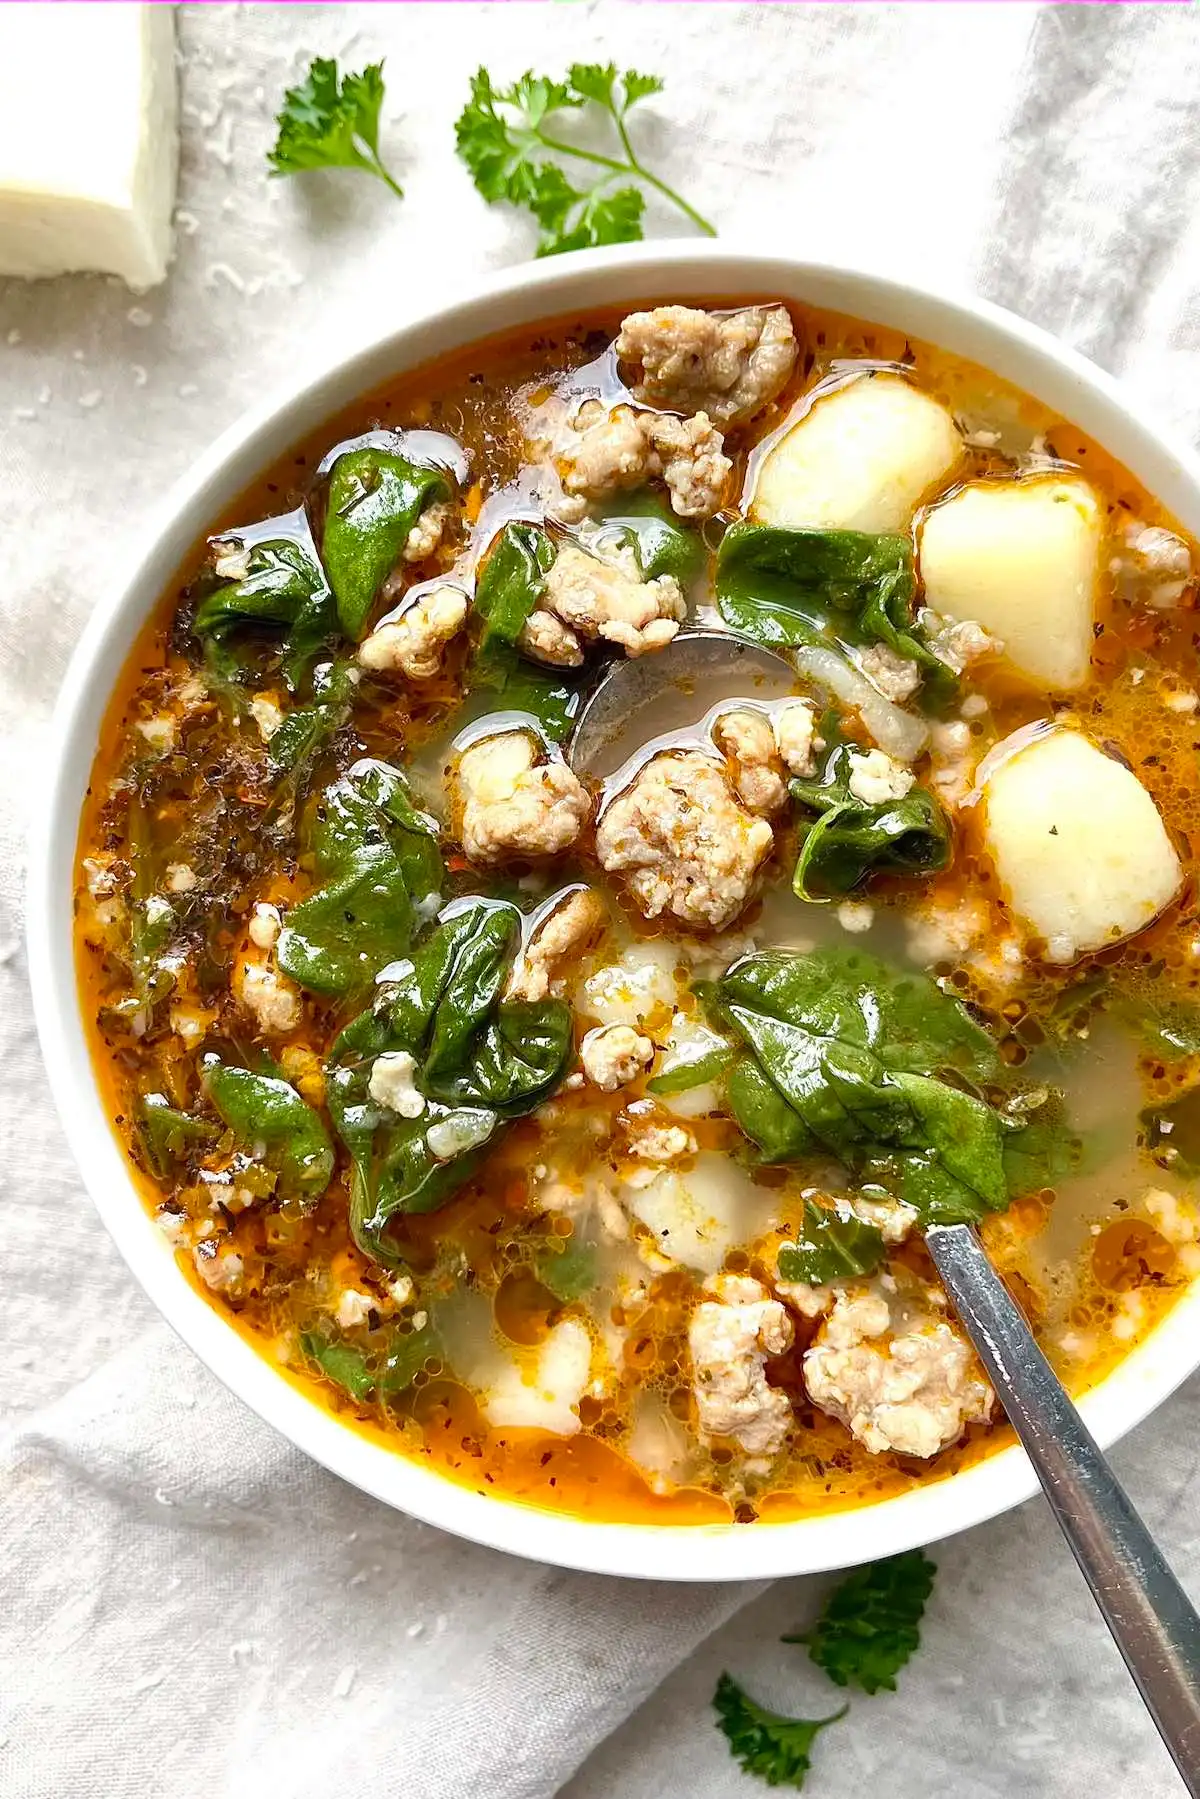 A hearty bowl of soup packed with flavorful meat and a medley of vegetables.